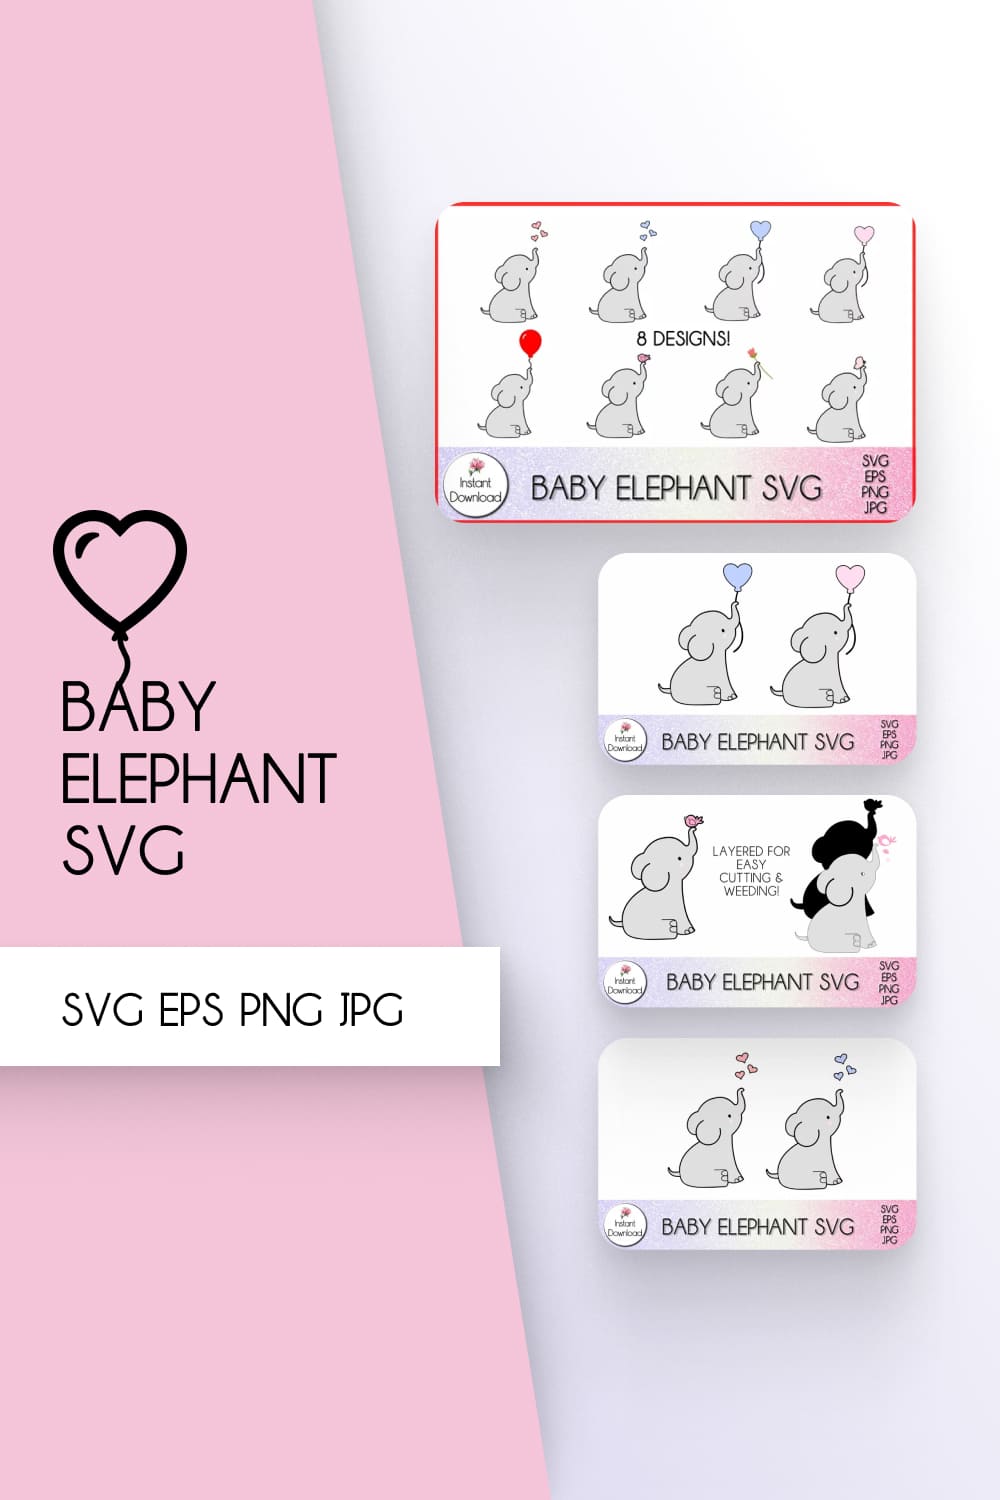 Baby elephant svg stickers on a pink background.